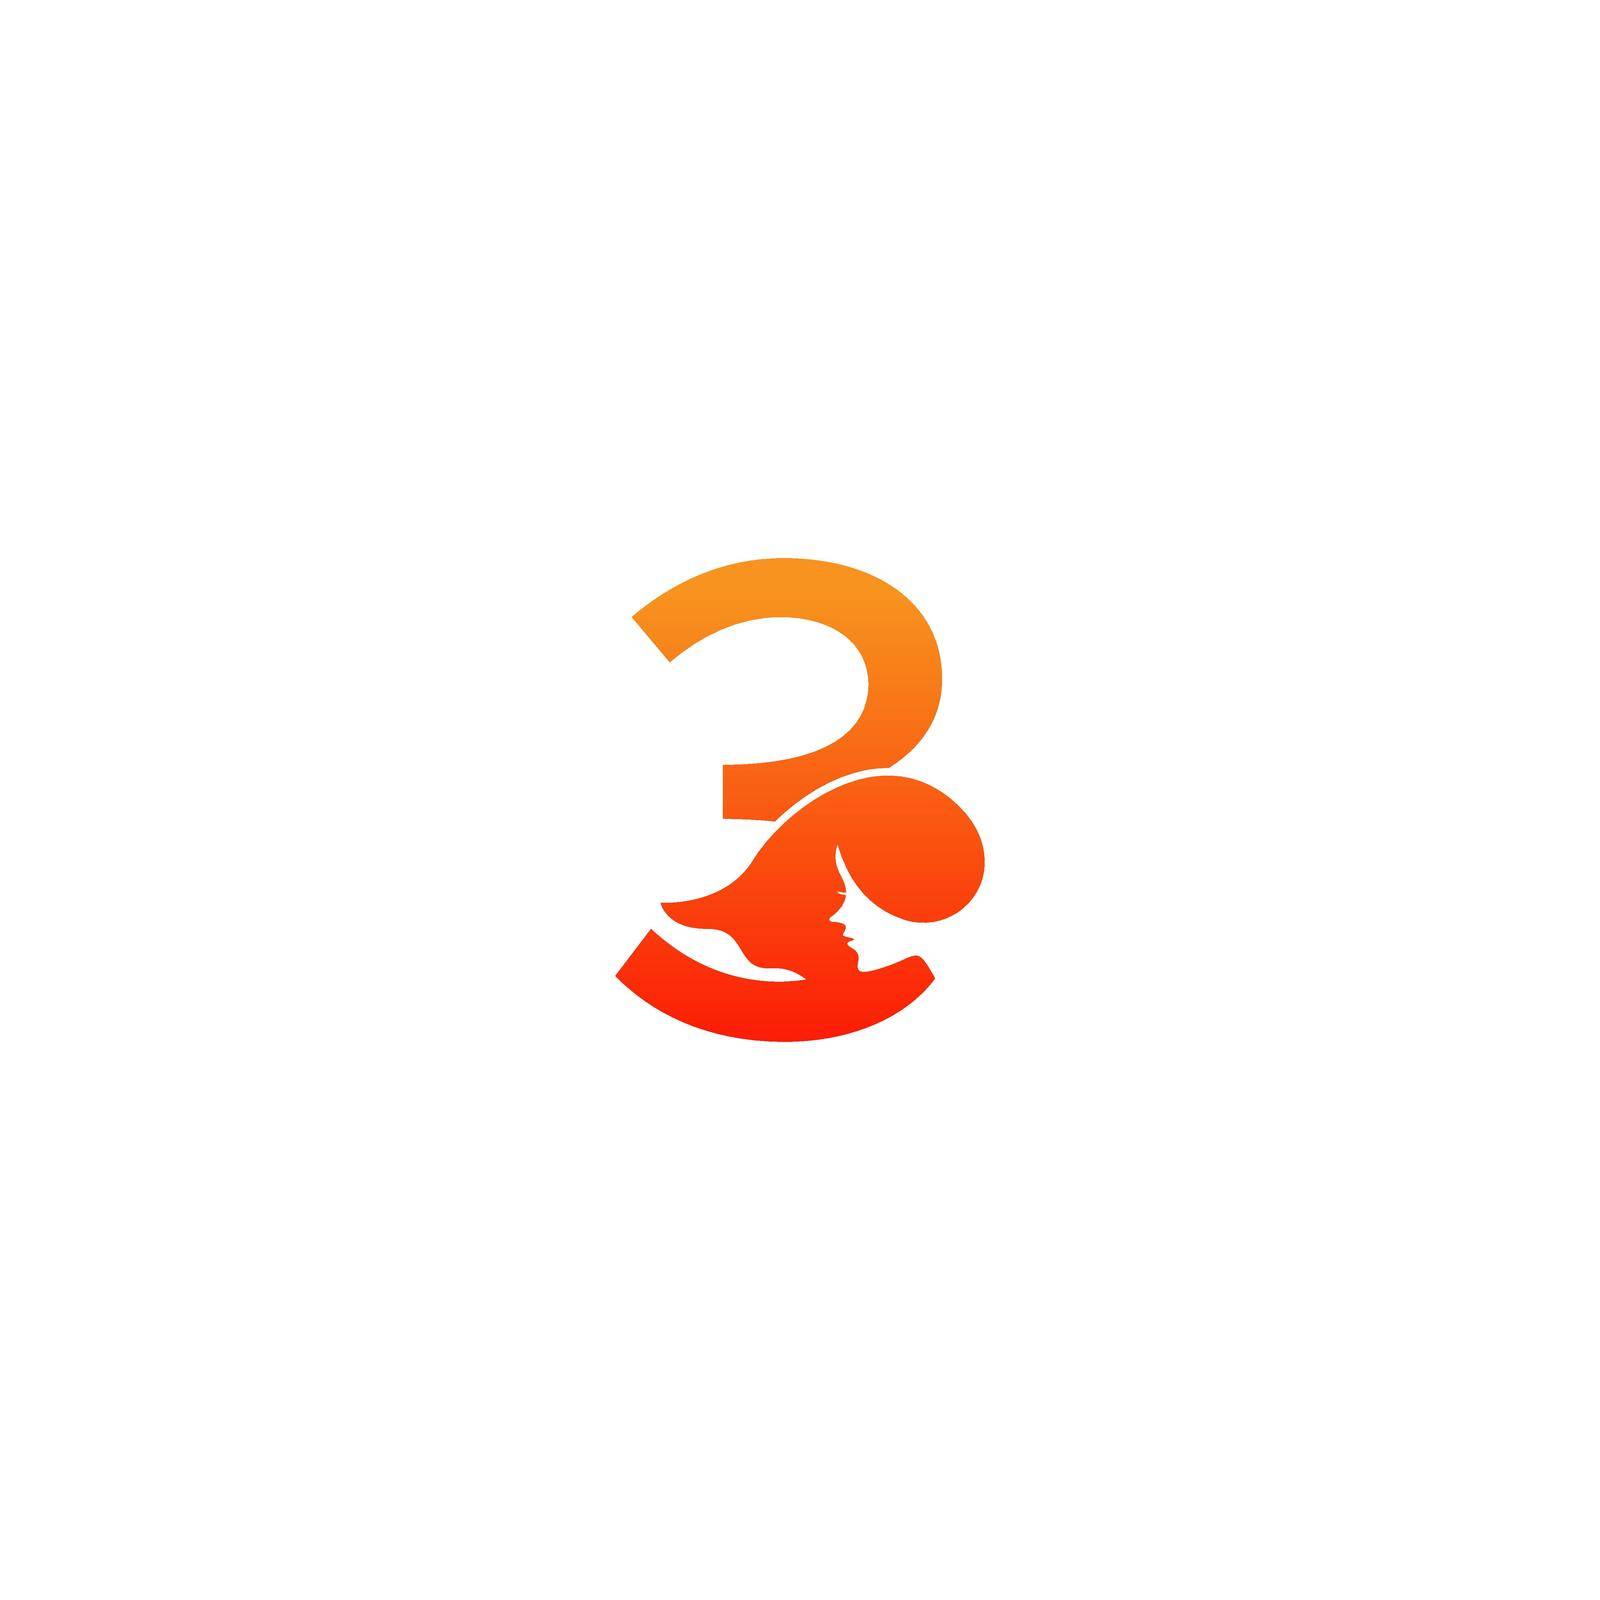 Number 3 with woman face logo icon design vector by bellaxbudhong3